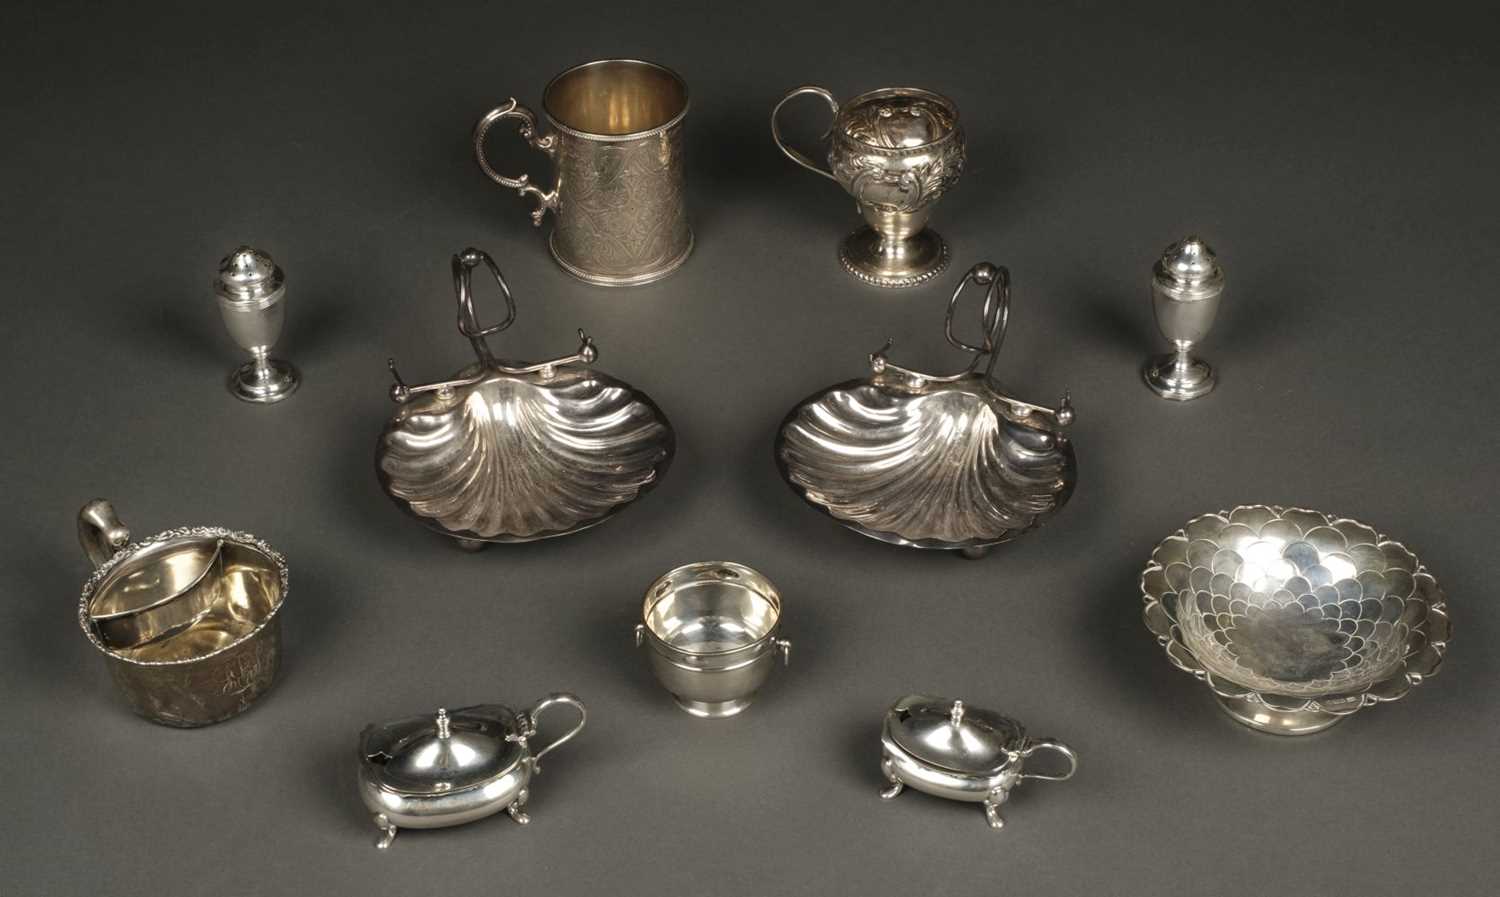 Lot 37 - Mixed Silver. Victorian silver mug and other items